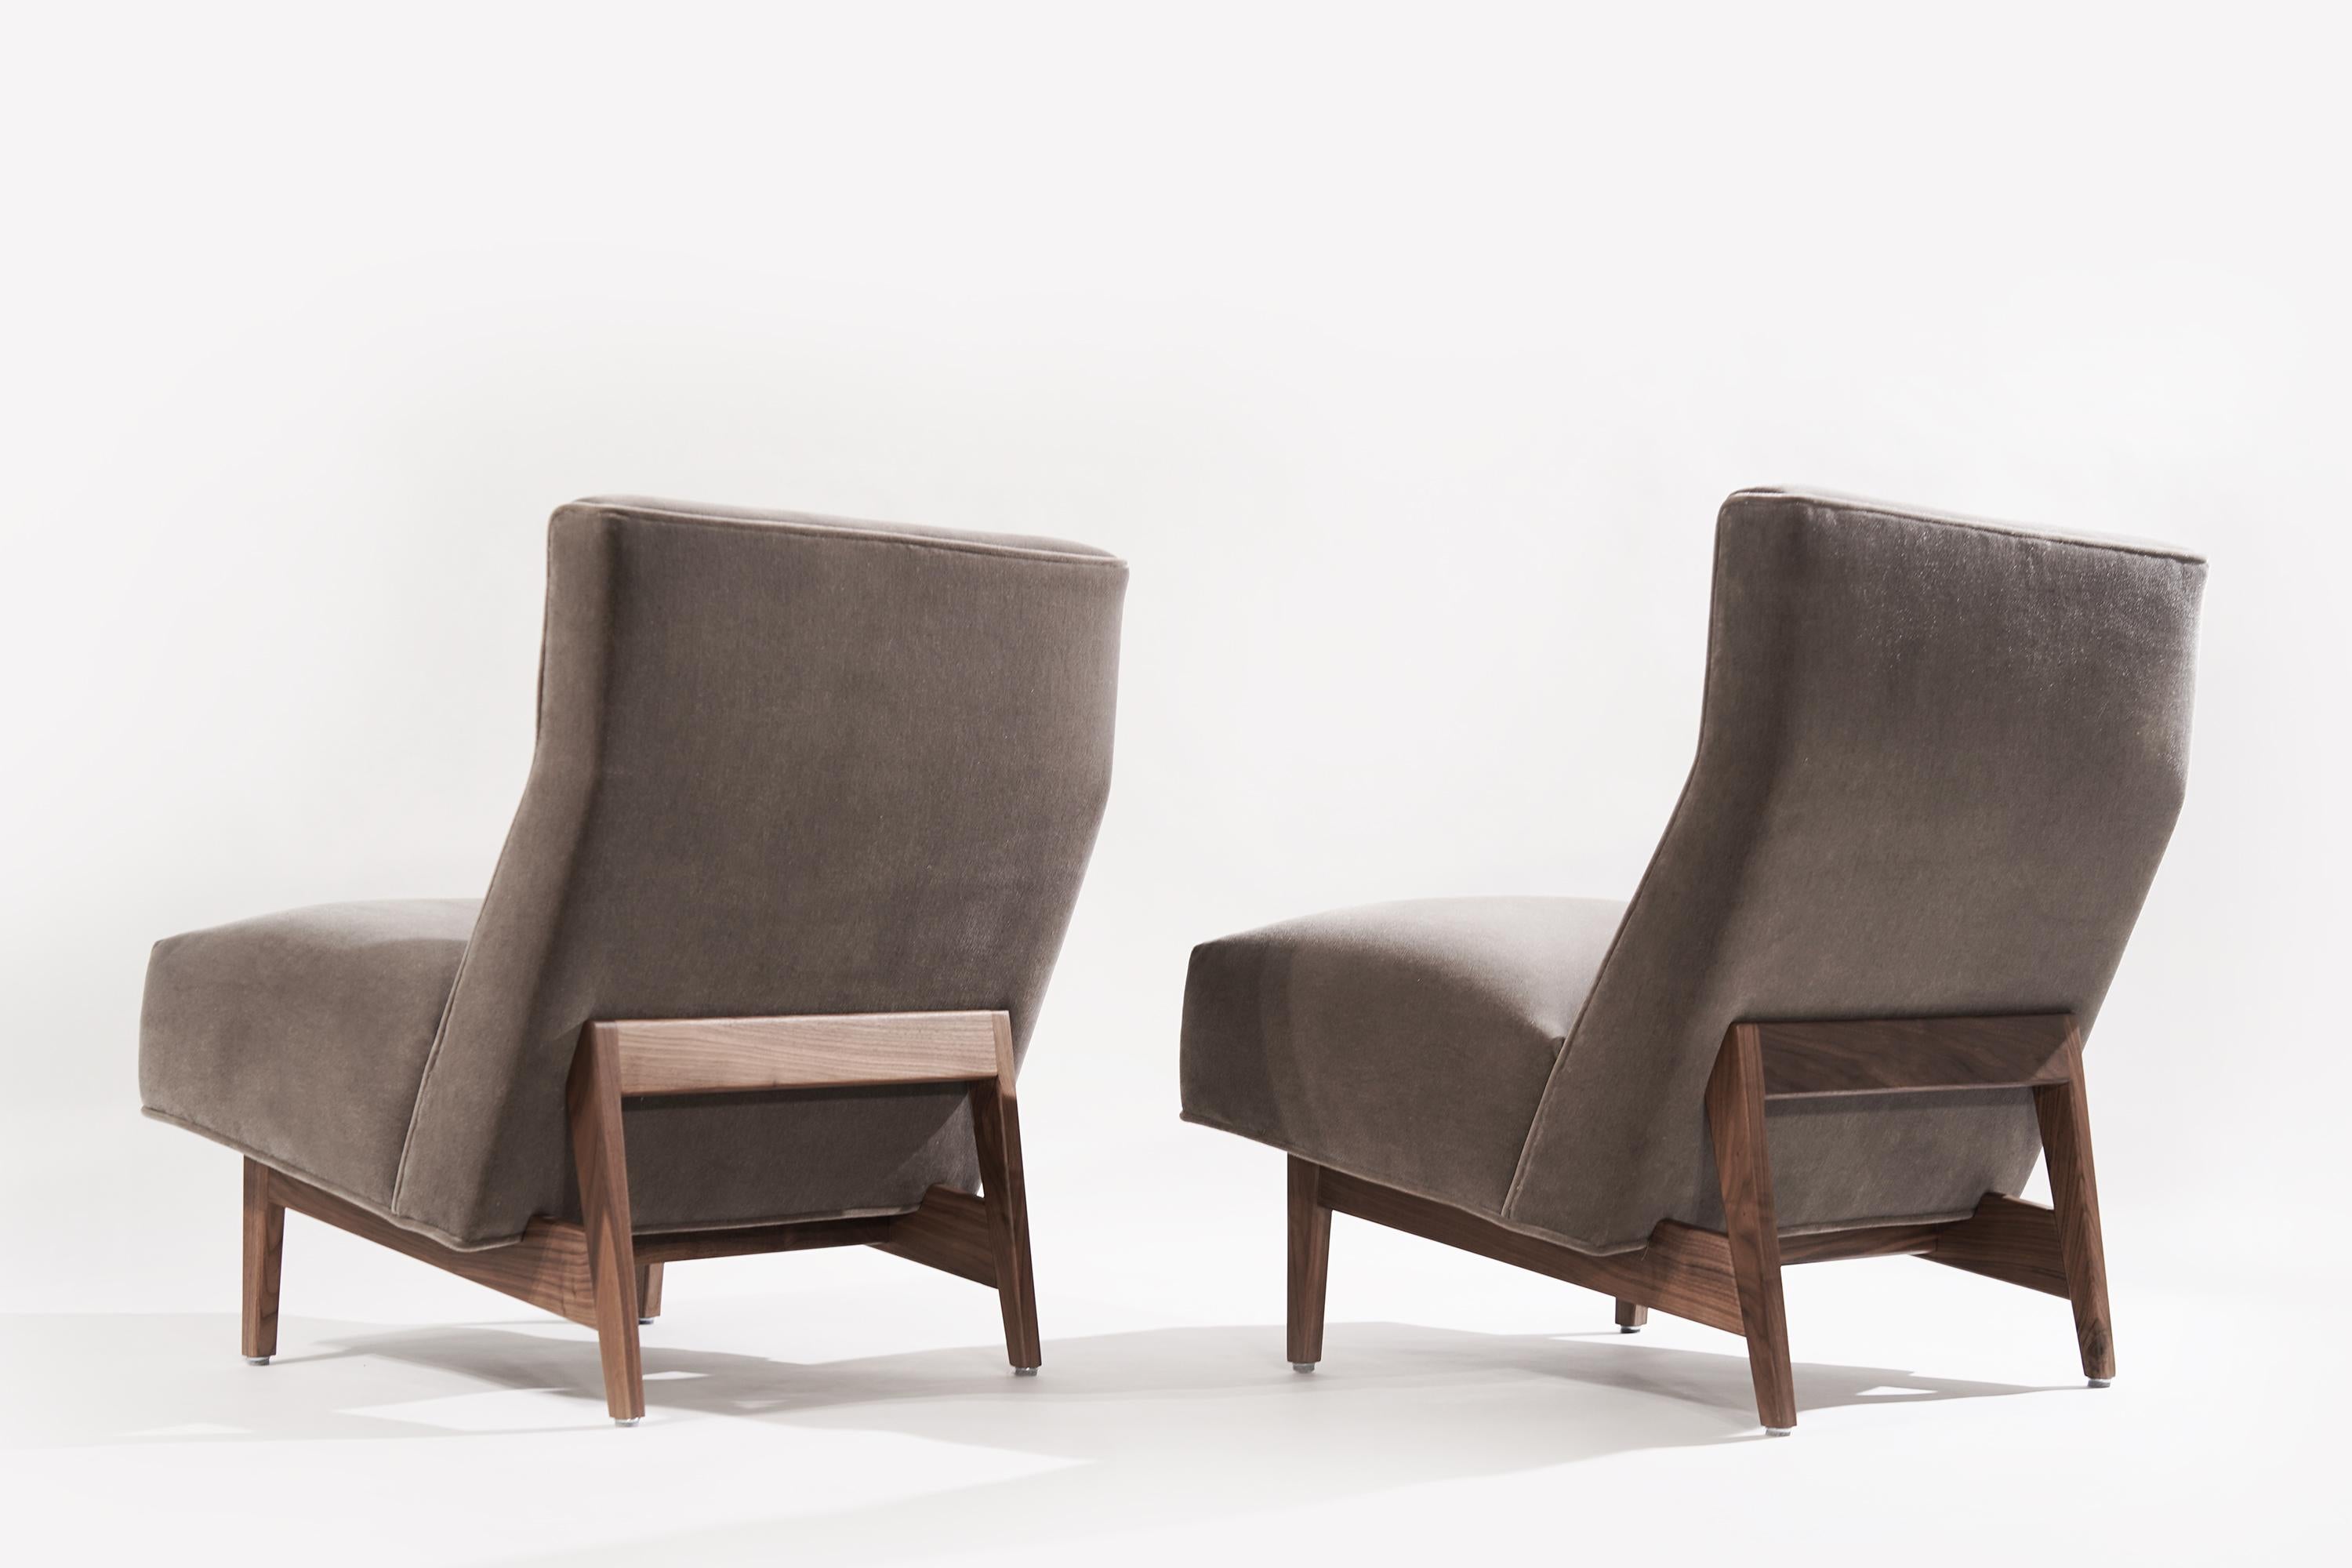 American Classic Slipper Chairs by Jens Risom in Mohair, circa 1950s